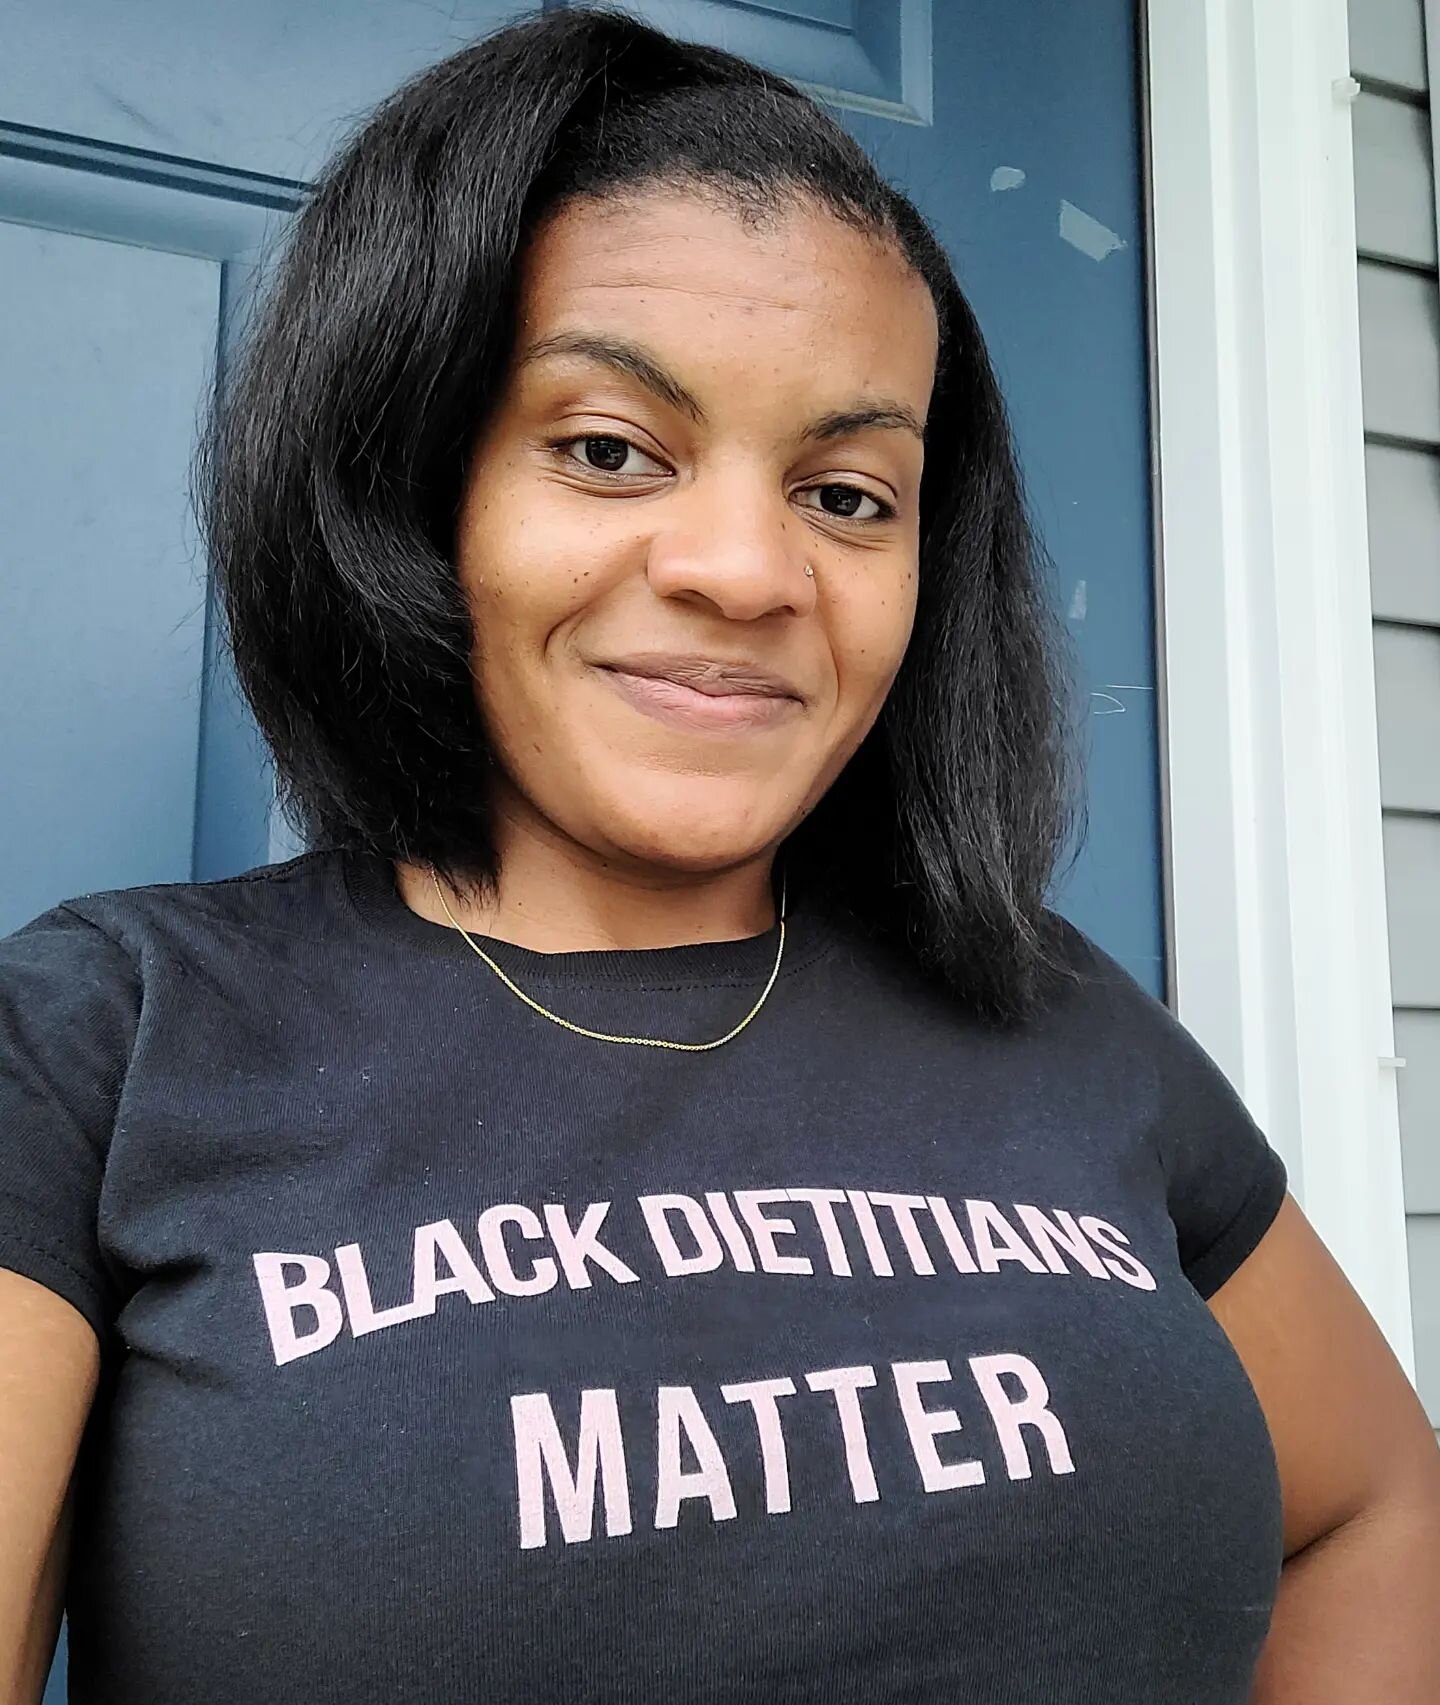 Happy Friday!!! Had to bring out a oldie but goodie today. Making sure you know, Black Dietitians Matters!

Did you know that less than 3% of Dietitians are black? Here are some Black RDs that I love to follow. And there are soooo many more! Tag your